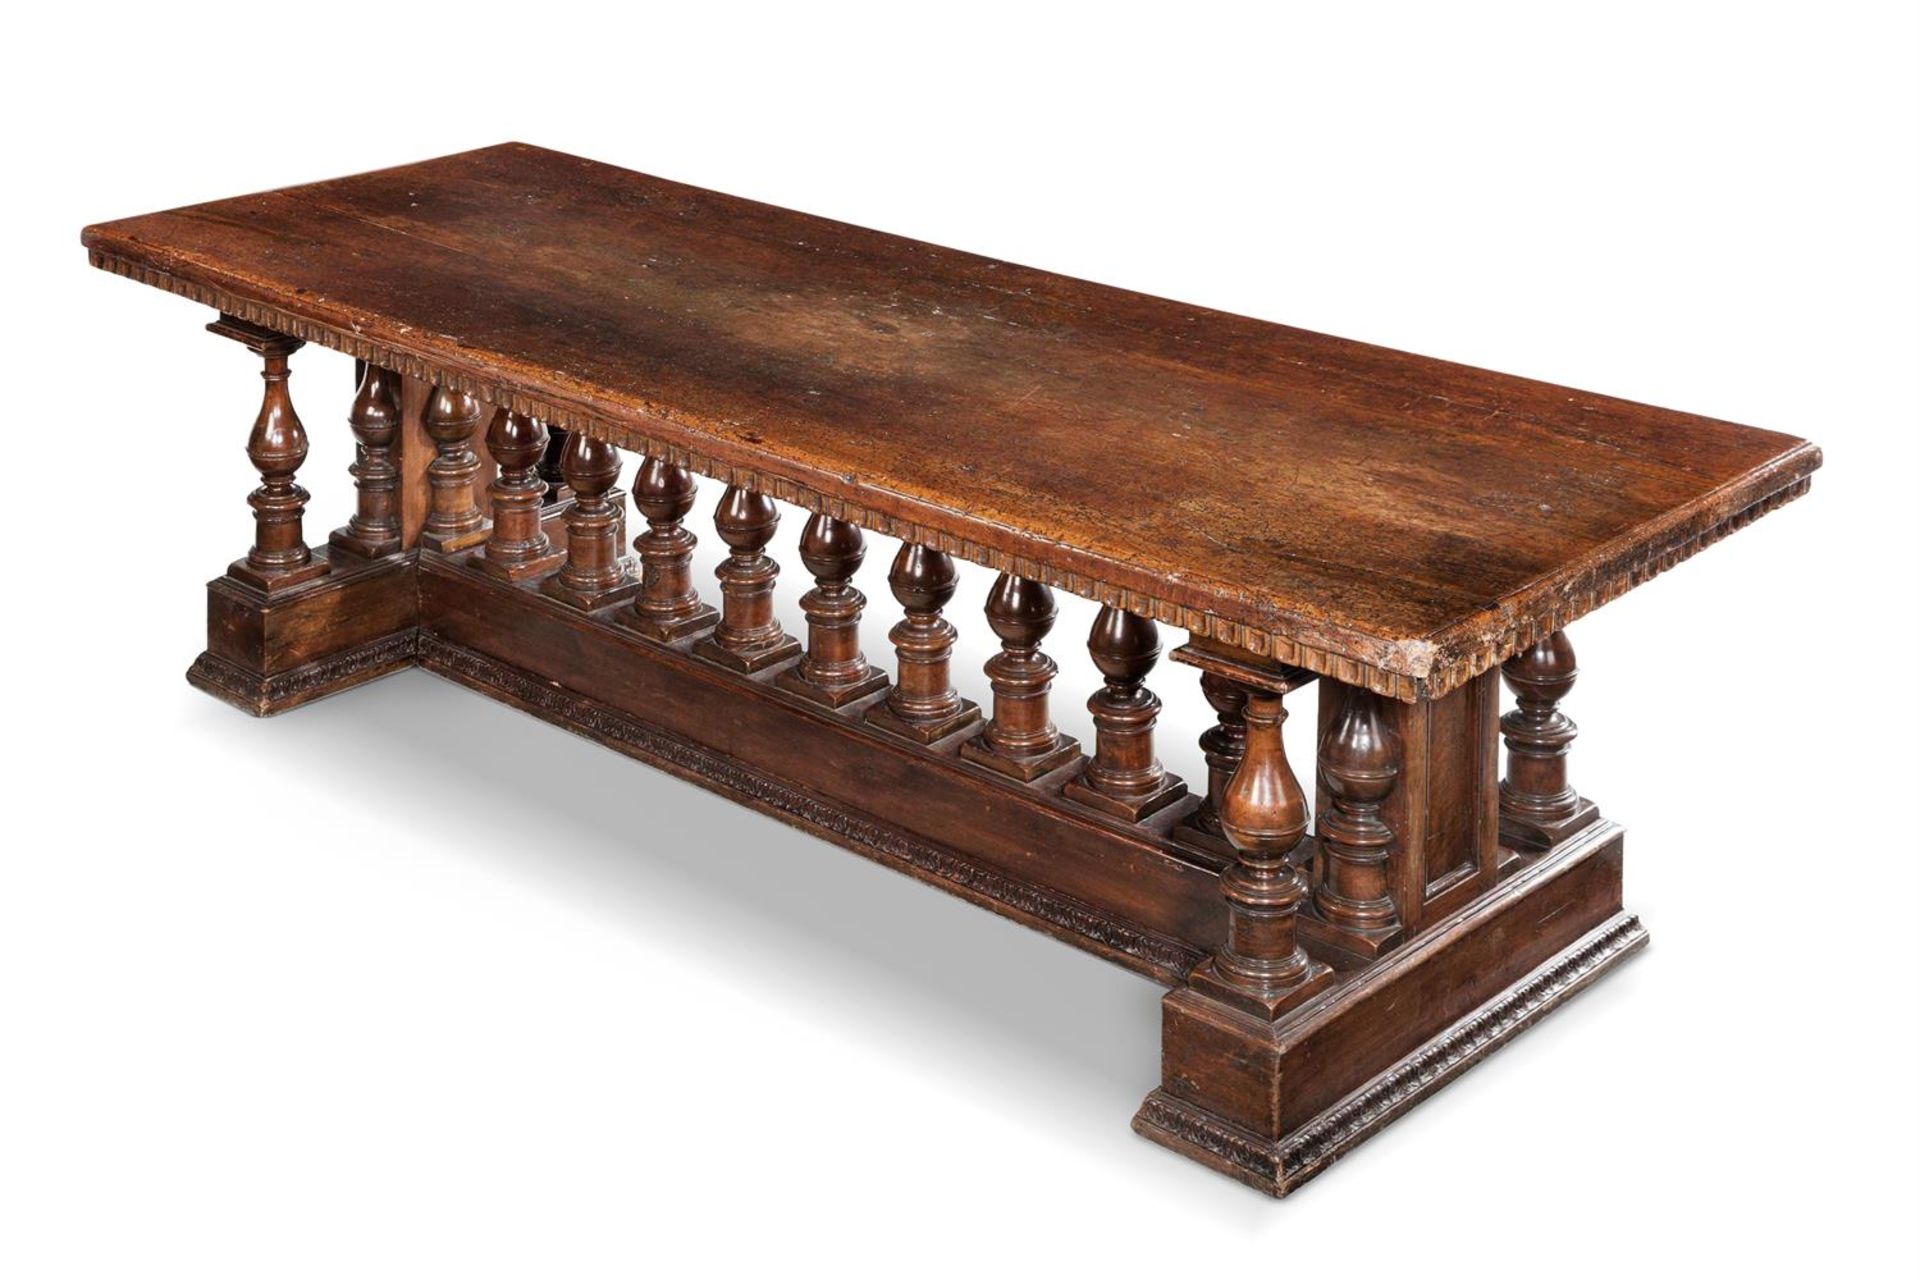 A LARGE ITALIAN CARVED WALNUT TABLE, INCORPORATING LATE 16TH/EARLY 17TH CENTURY ELEMENTS - Bild 2 aus 4